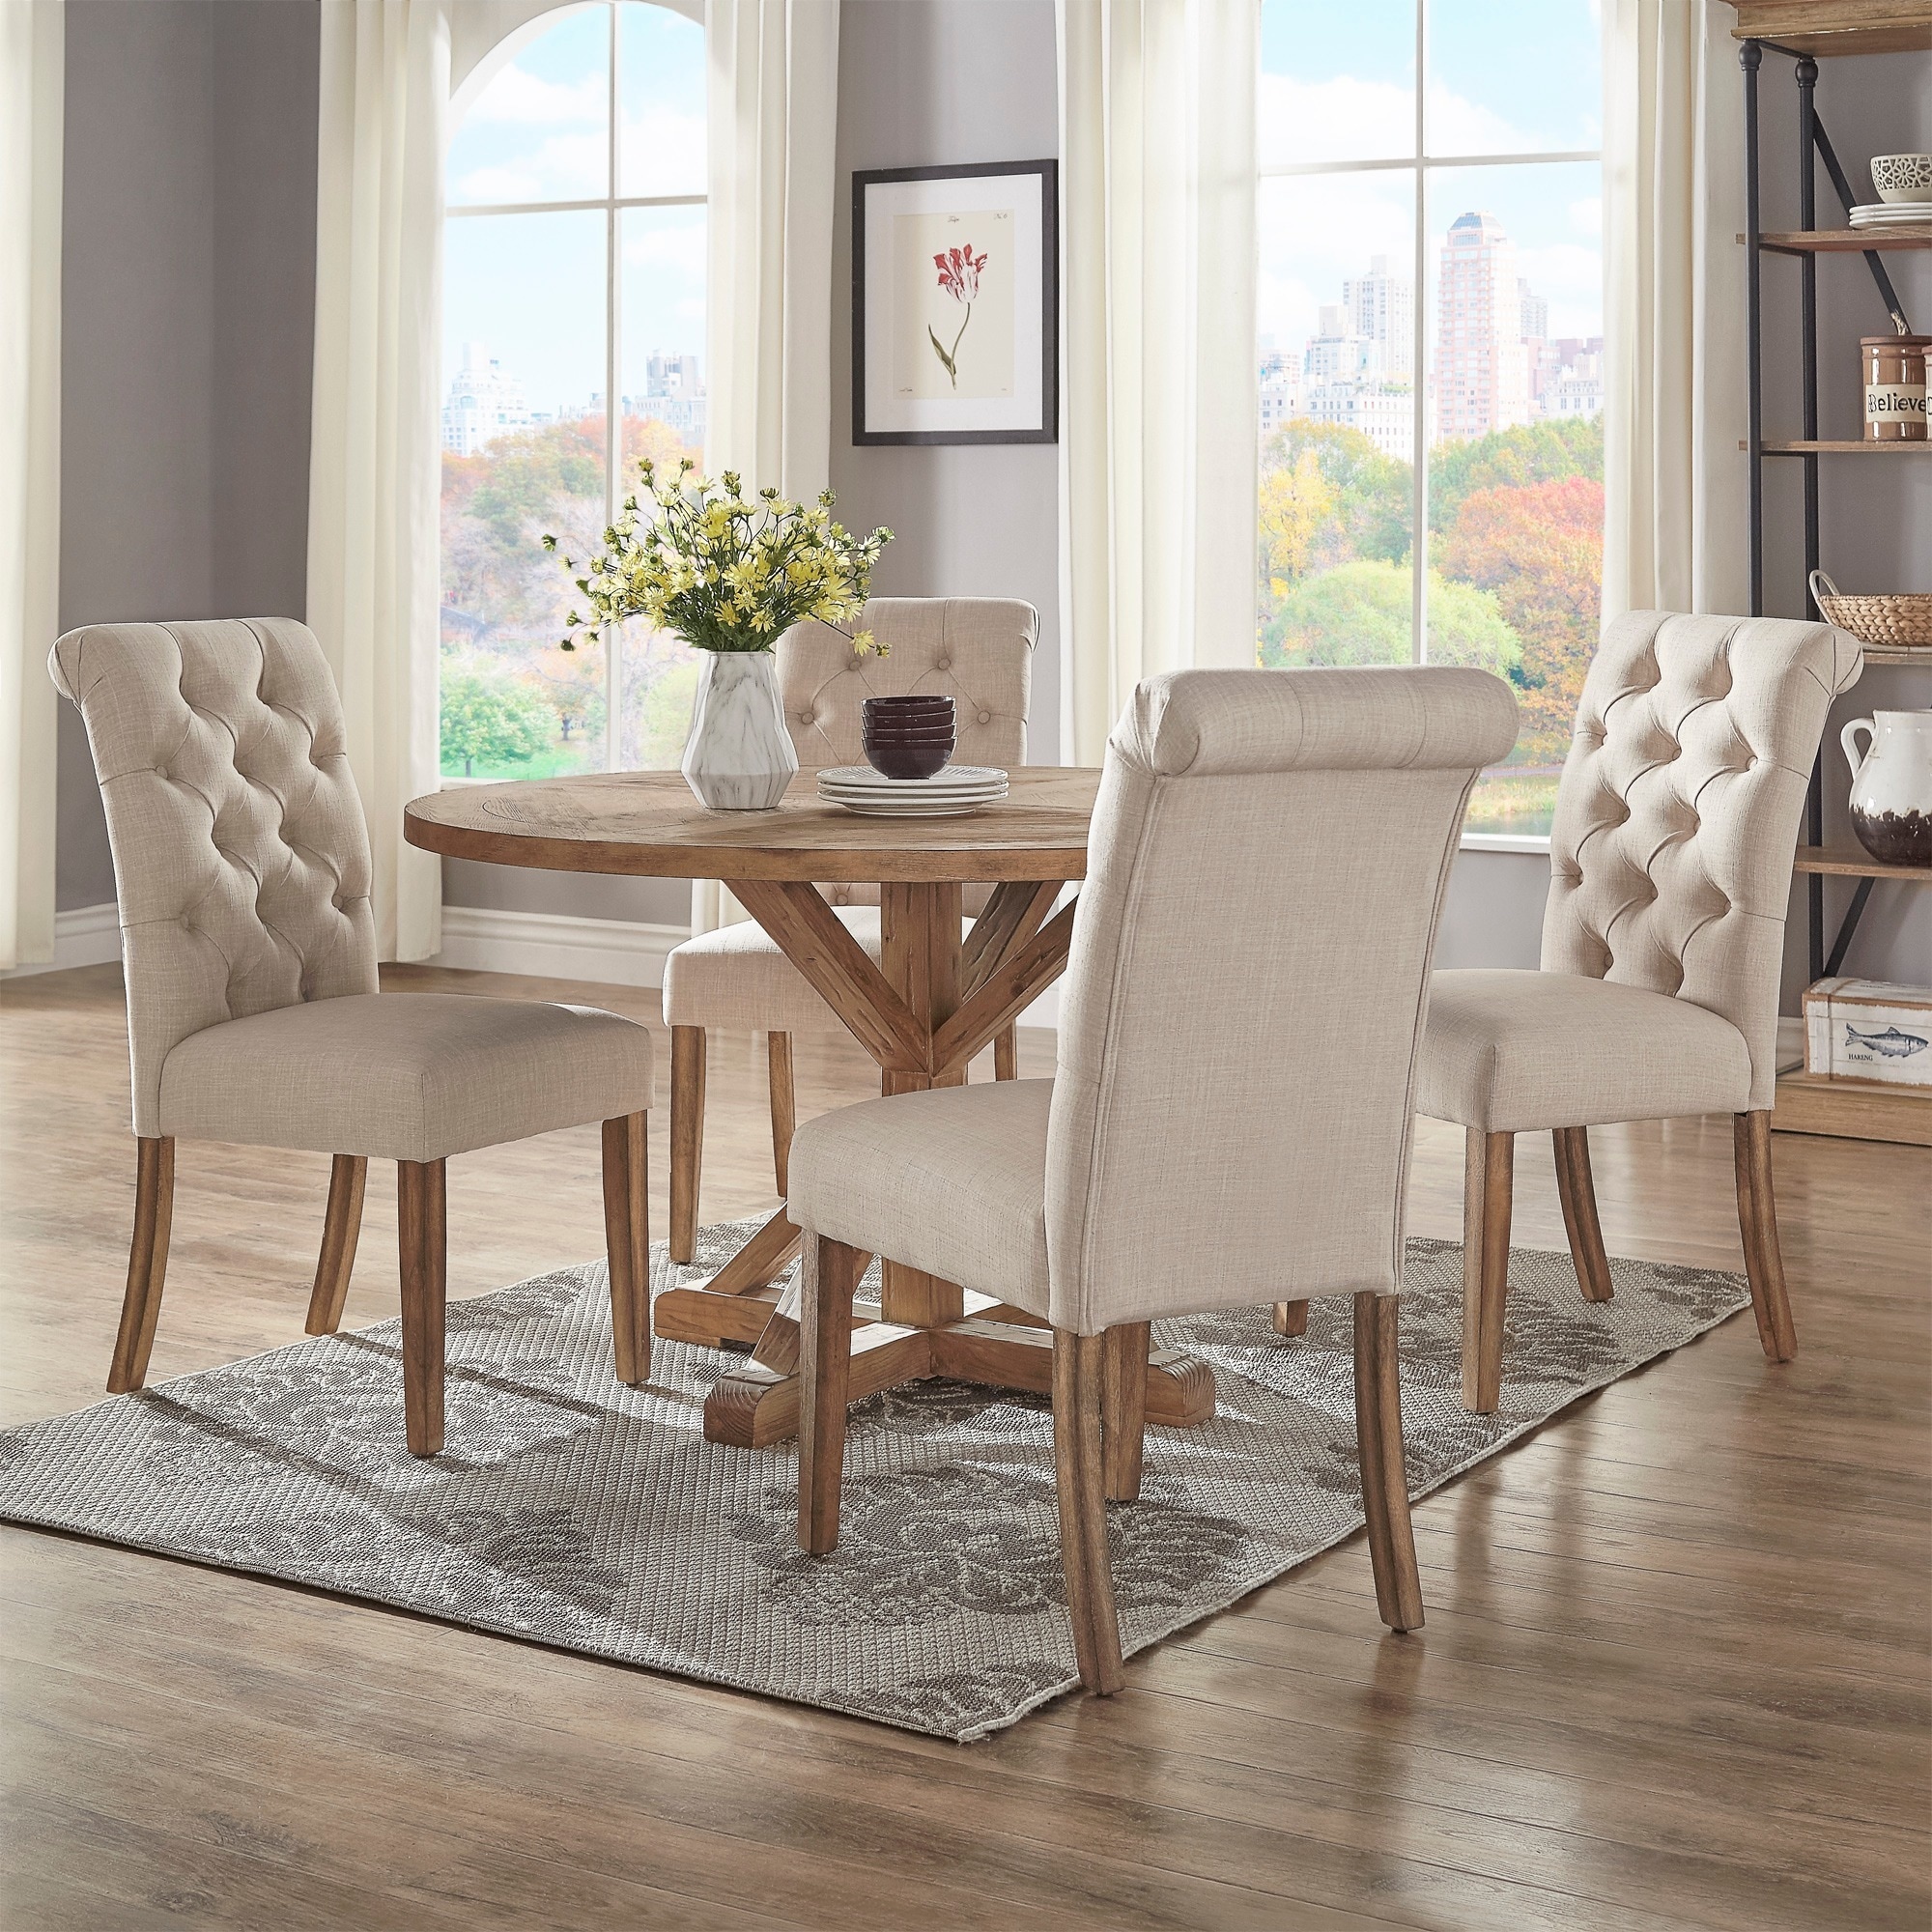 48 Inch Round Dining Table Set